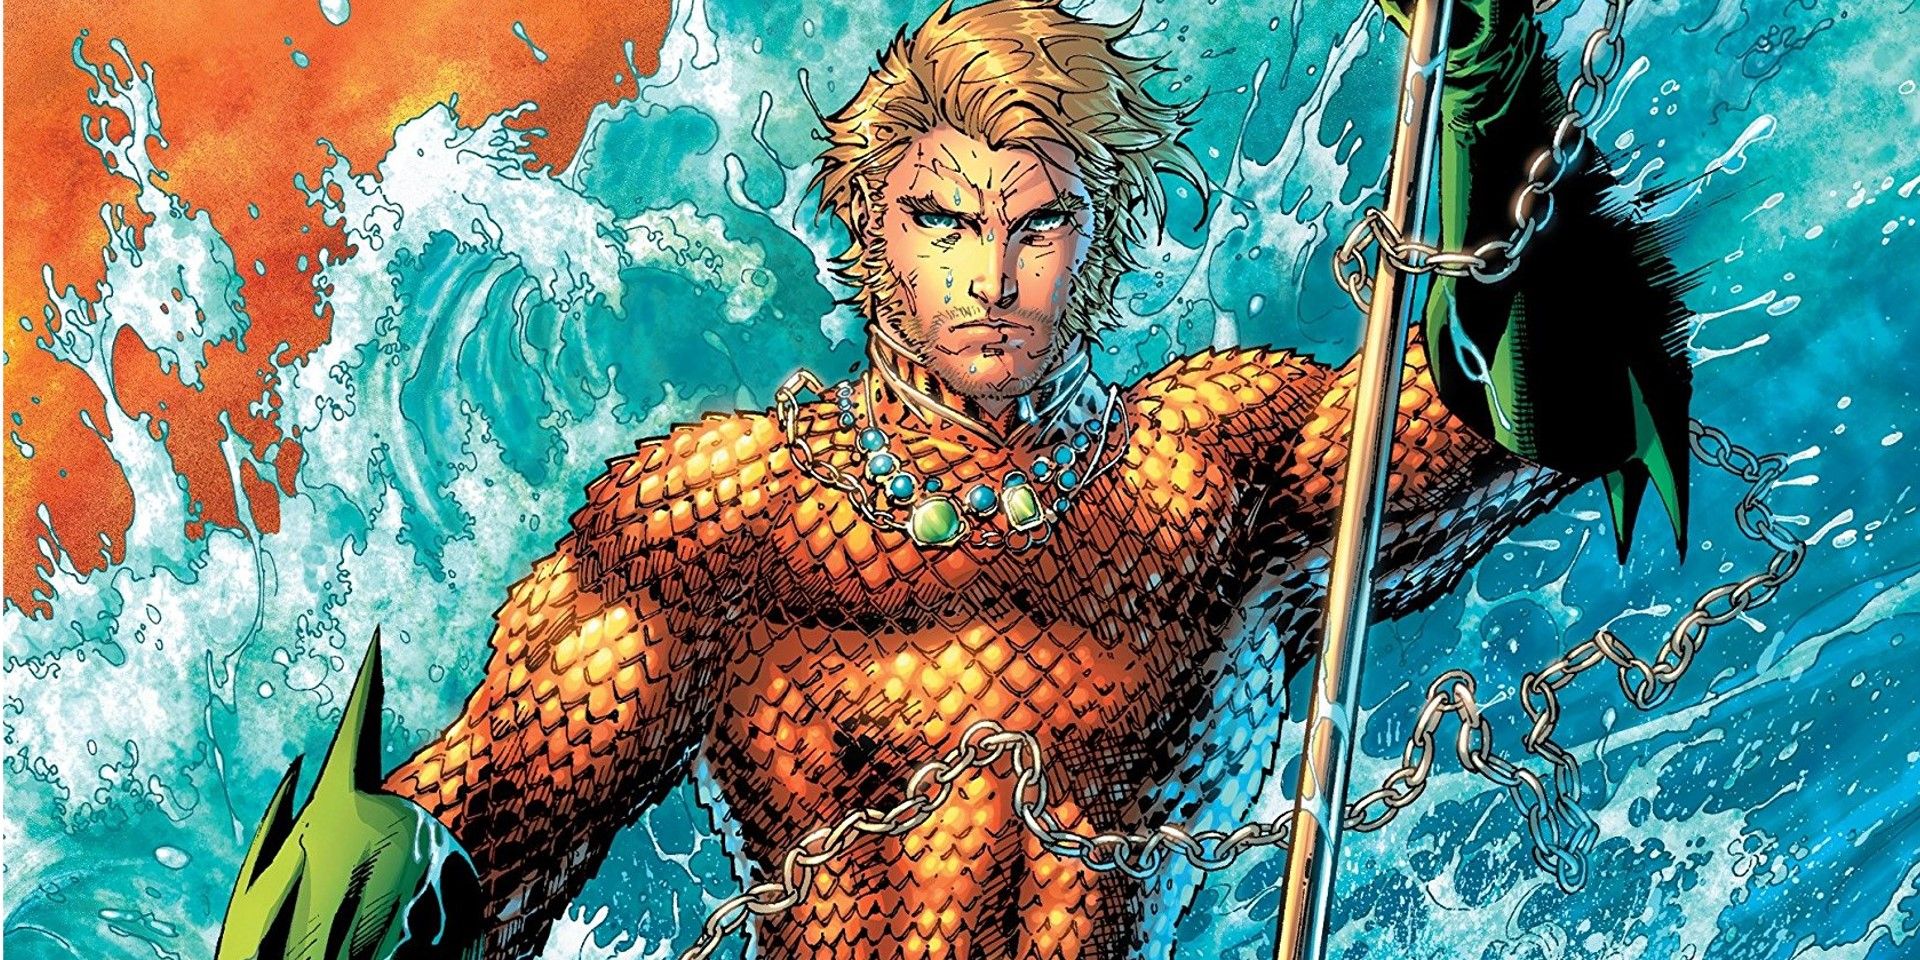 Aquaman stands in a regal pose while a wave breaks behind him in DC New 52.